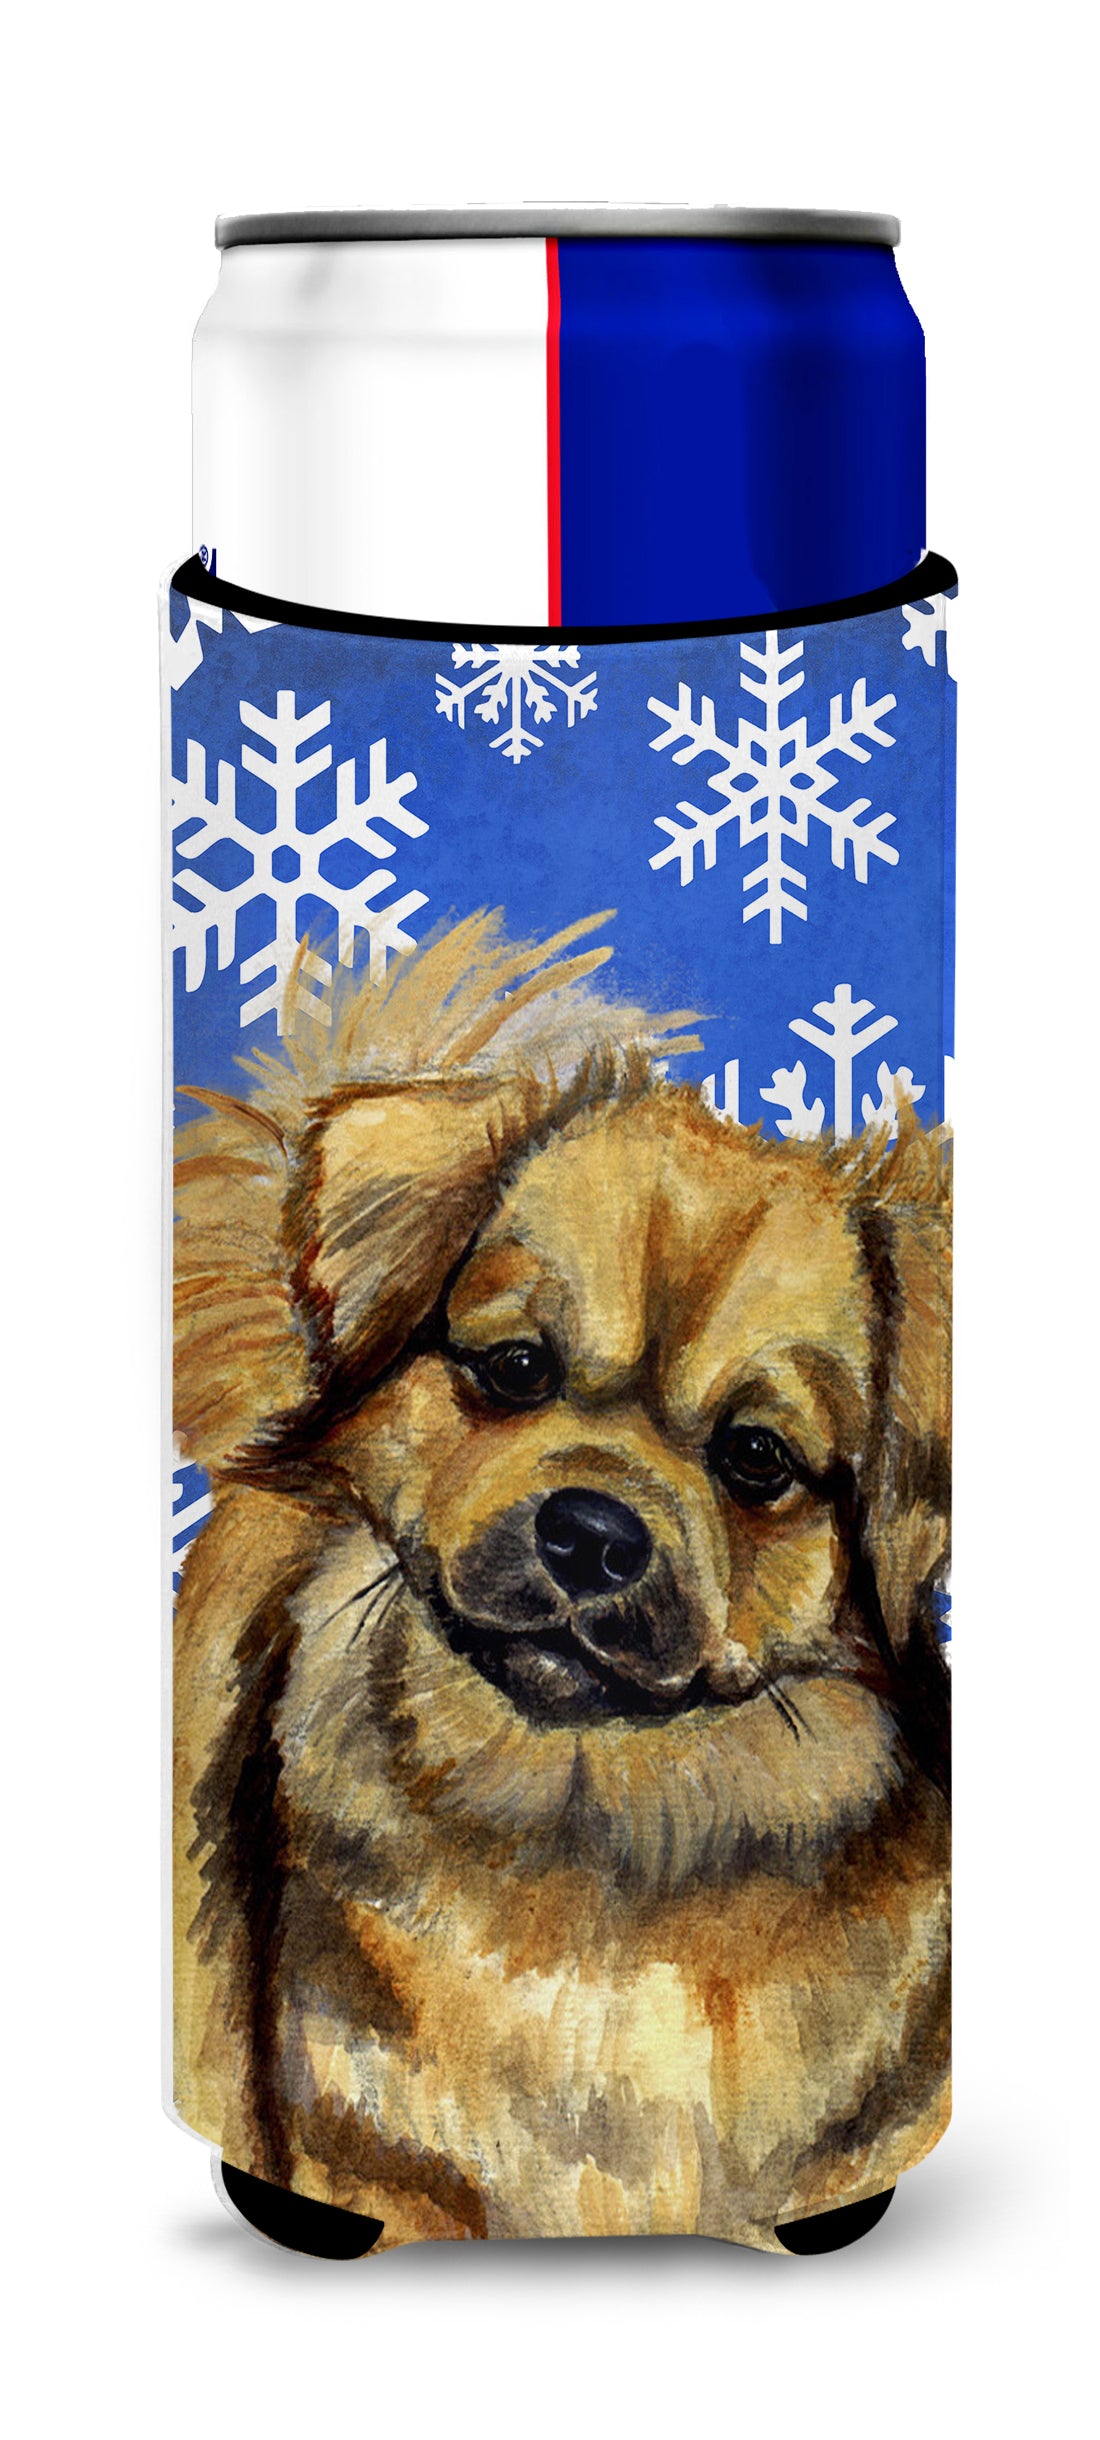 Tibetan Spaniel Winter Snowflakes Holiday Ultra Beverage Insulators for slim cans LH9304MUK.